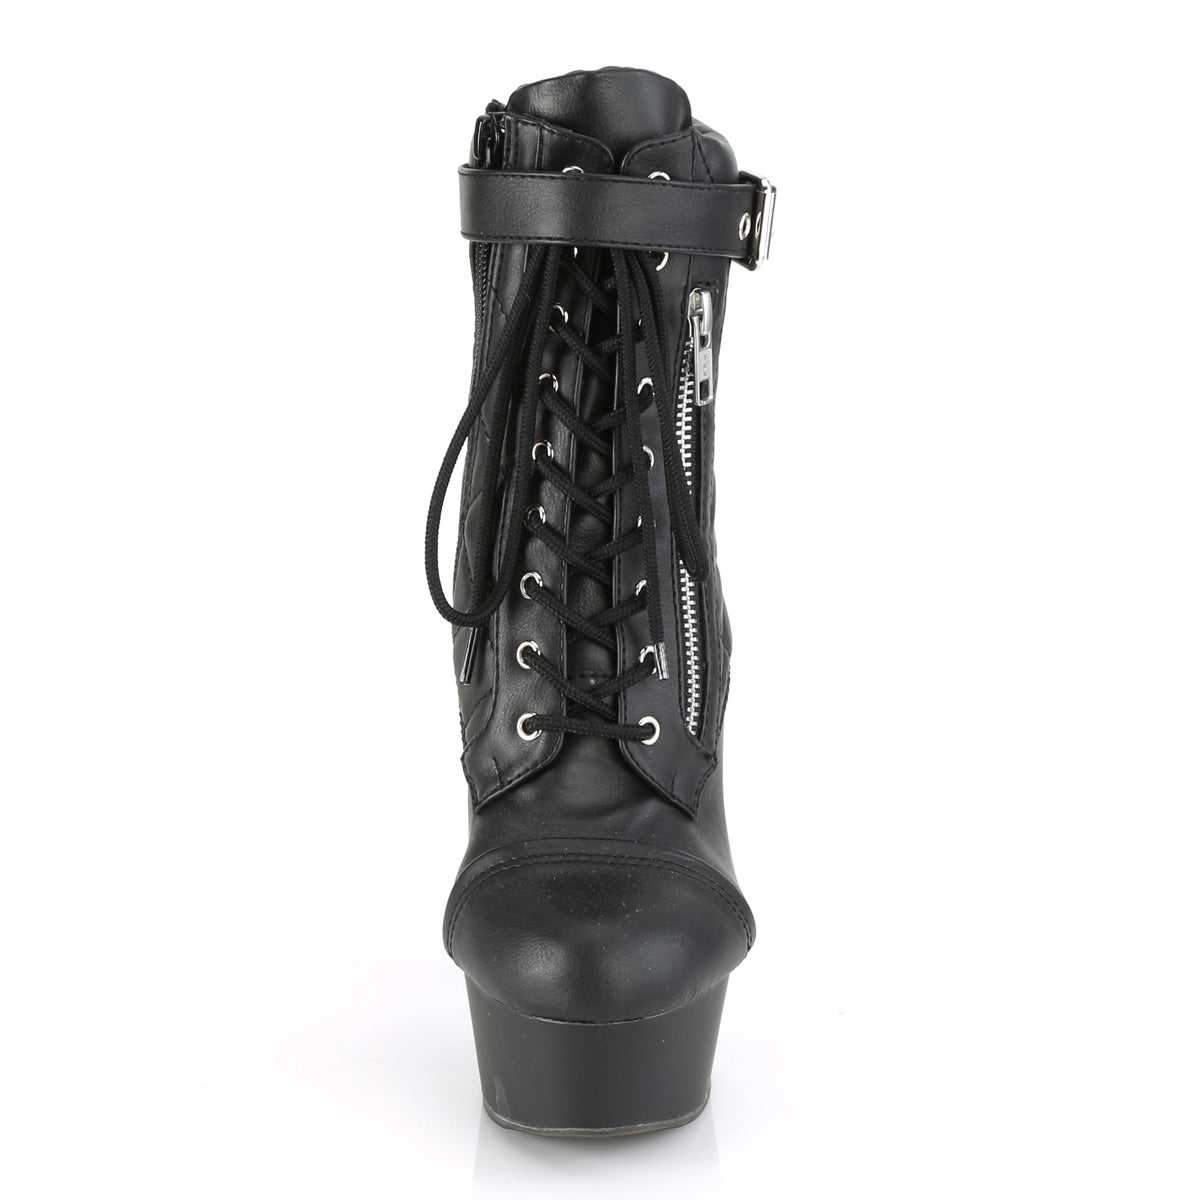 DELIGHT-600-05 Black Faux Leather Ankle Boot Pleaser